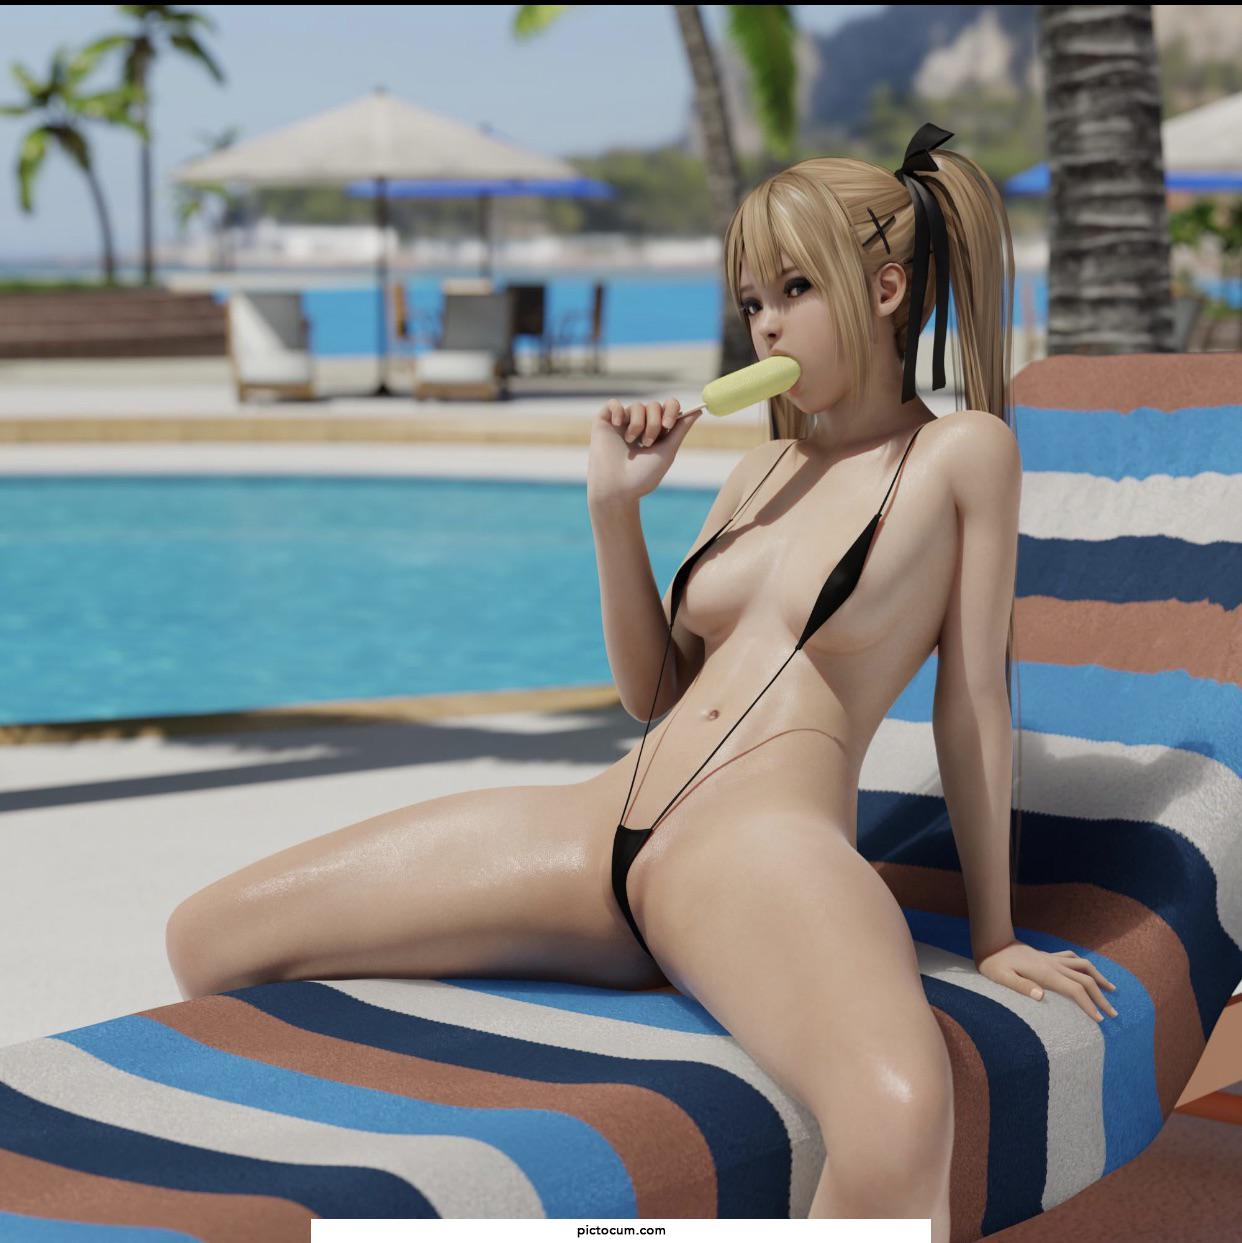 Hot girl chilling at the beach in micro bikini. The best sort . Idk the artist